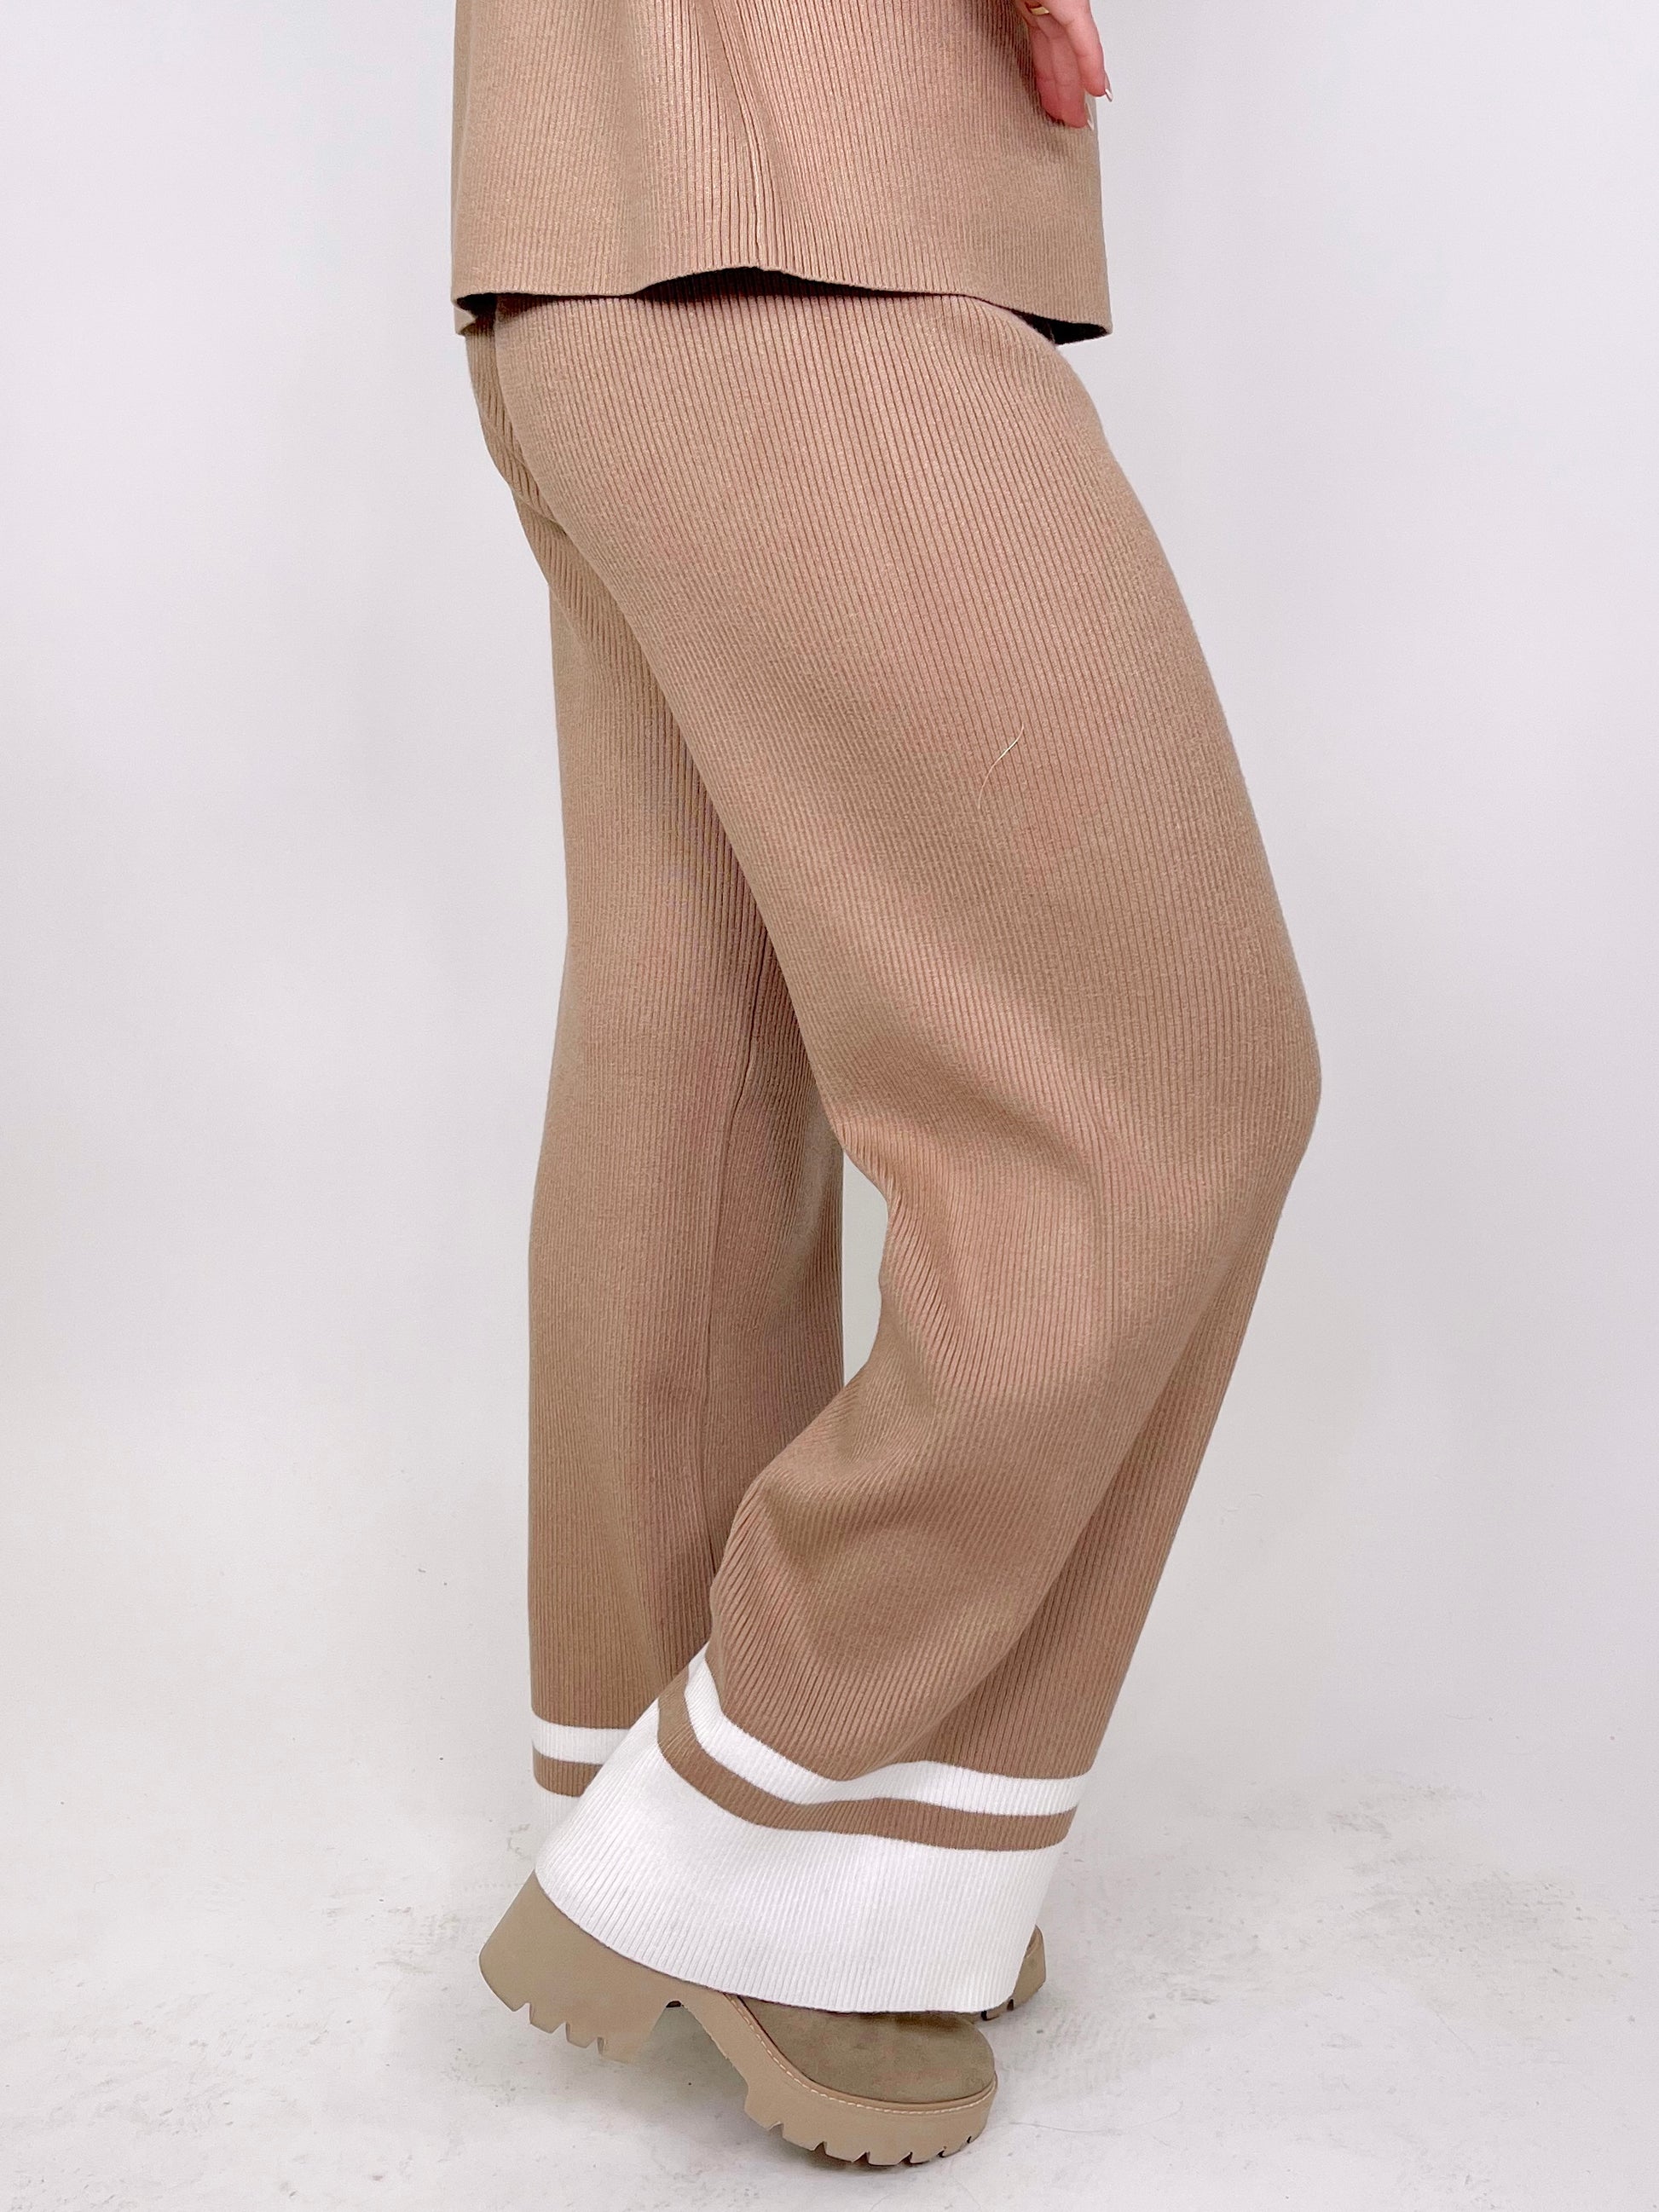 The Sophie Bottoms-Lounge Pants-The Village Shoppe-The Village Shoppe, Women’s Fashion Boutique, Shop Online and In Store - Located in Muscle Shoals, AL.